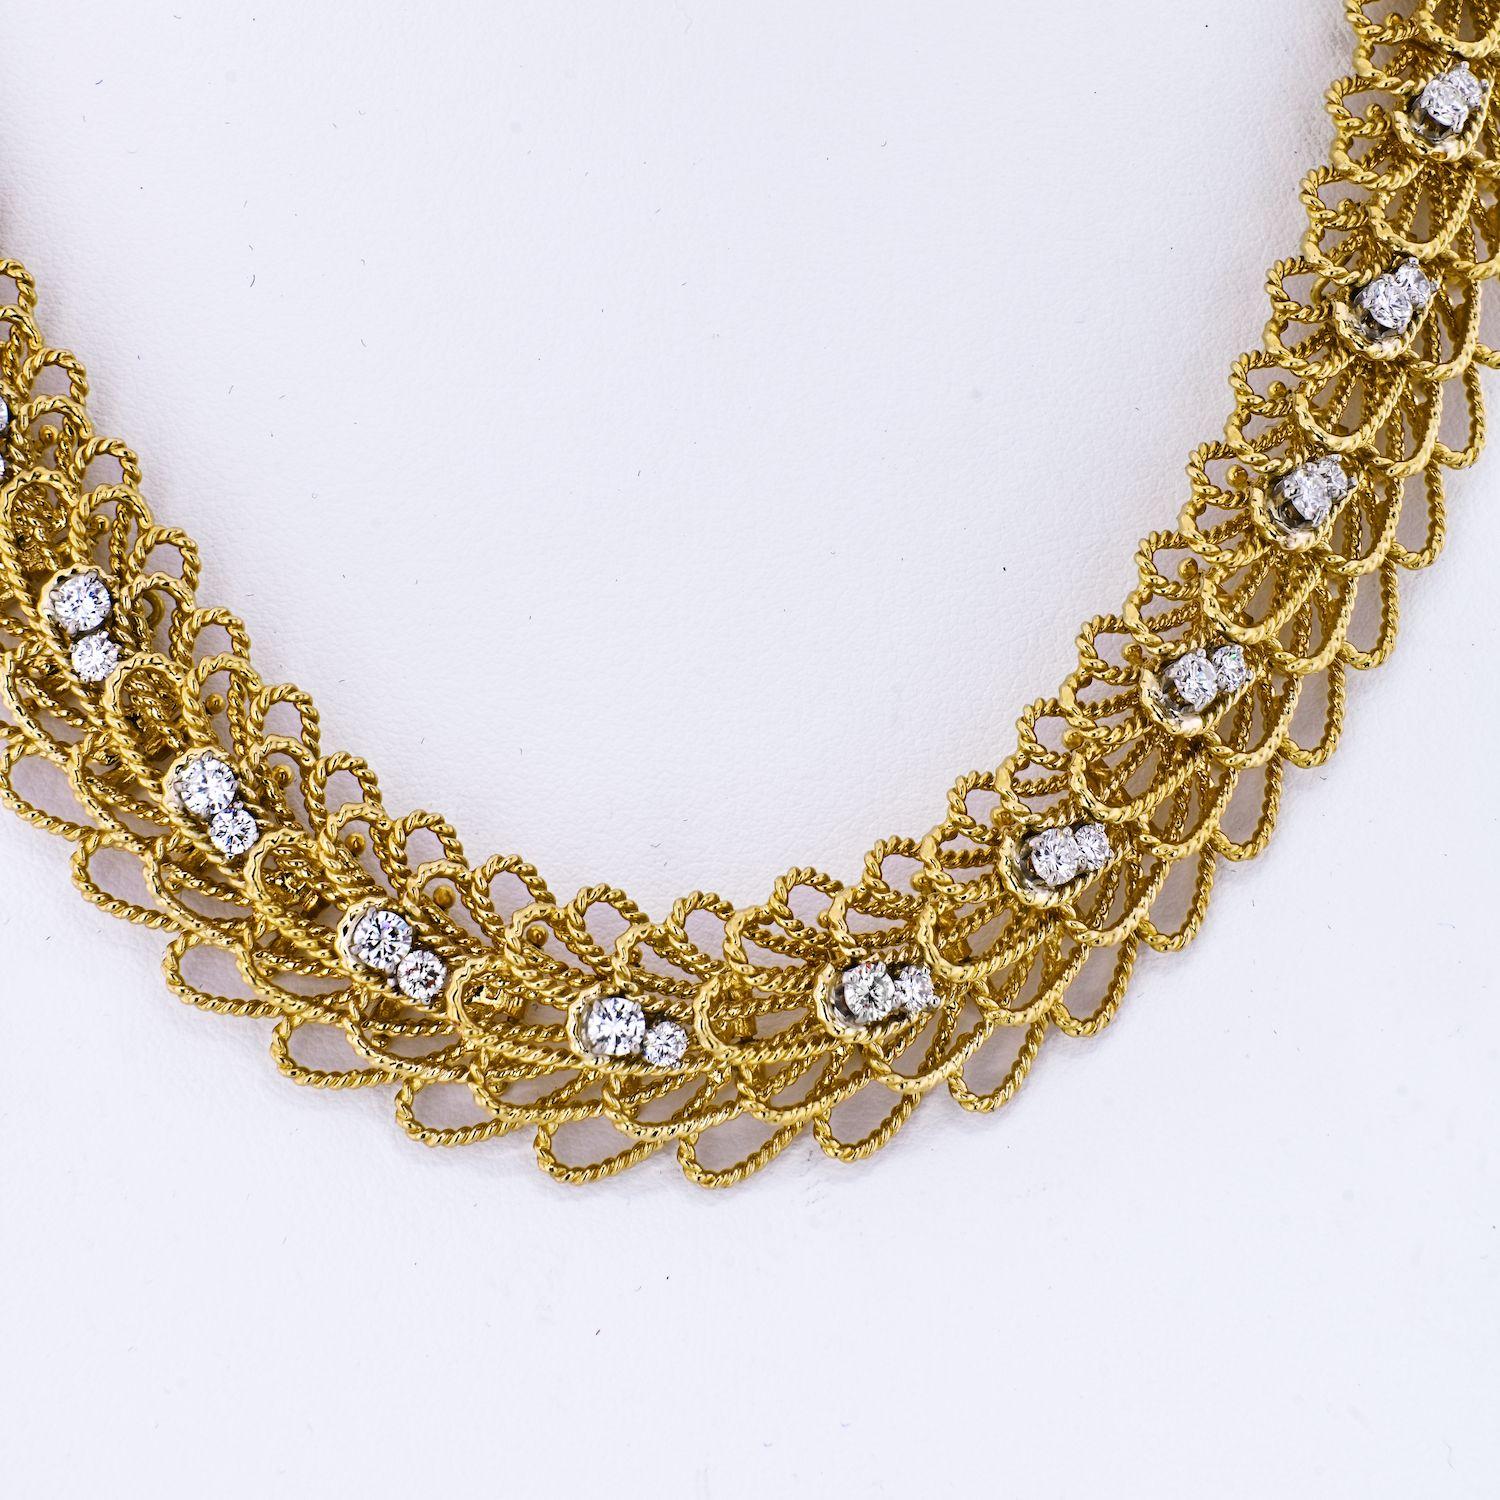 The artistry and inspiration of David Webb never cease! This necklace is a delicate creation, forged of twisted golden ropes, woven together in a braided pattern and decorated with round cut diamonds. The diamonds are set in platinum and weigh a